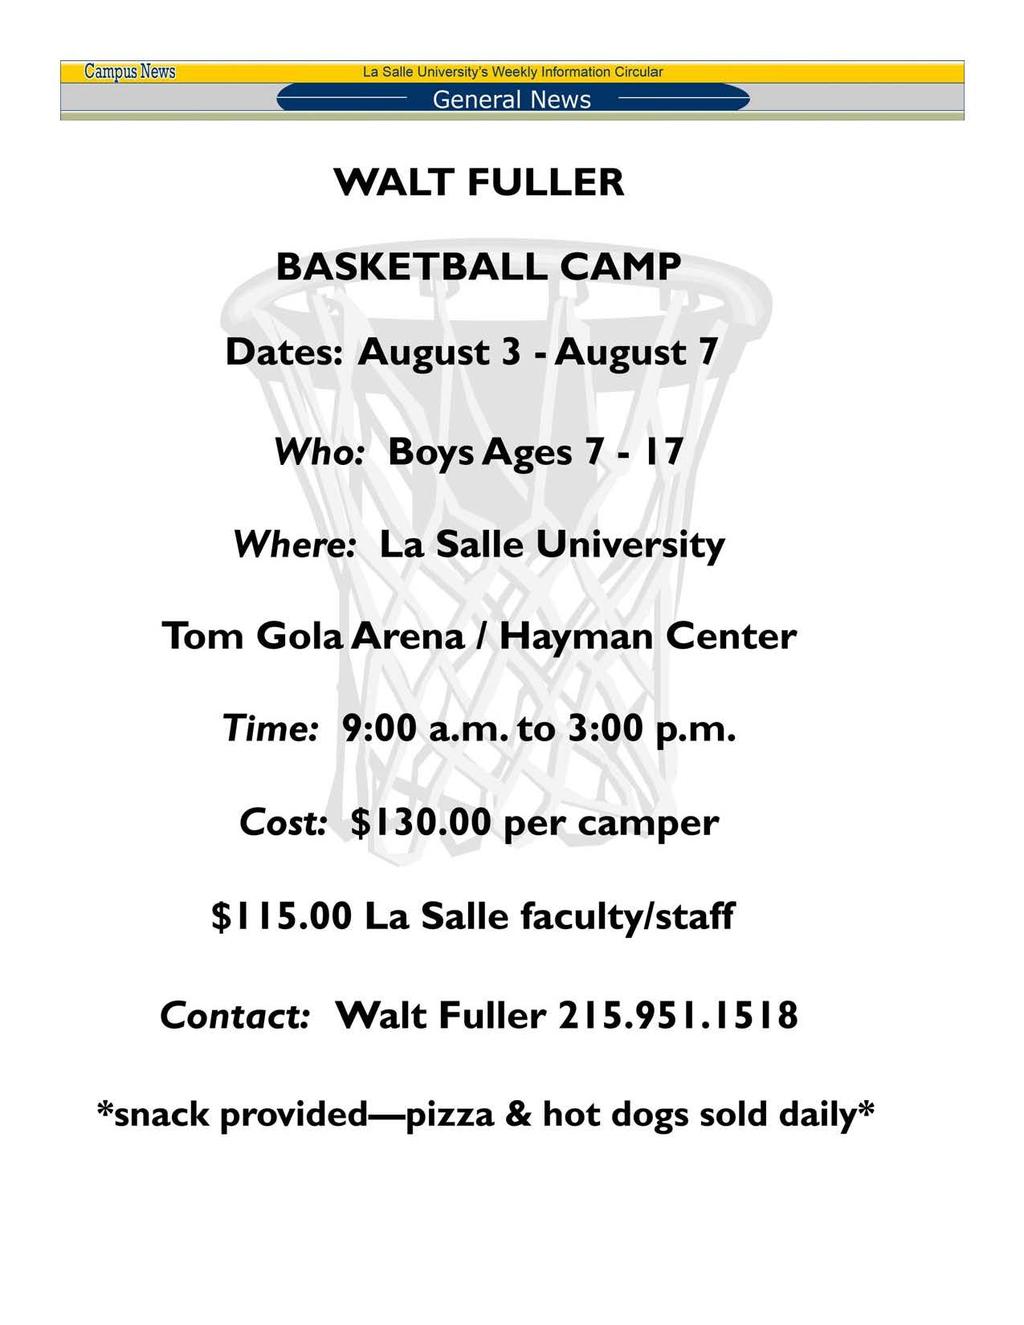 Cam usnews La Salle University's Weekly Information Circular General News Page 2 WALT FULLER BASKETBALL CAMP Dates: August 3 - August 7 Who: Boys Ages 7 - I 7 Where: La Salle University Tom